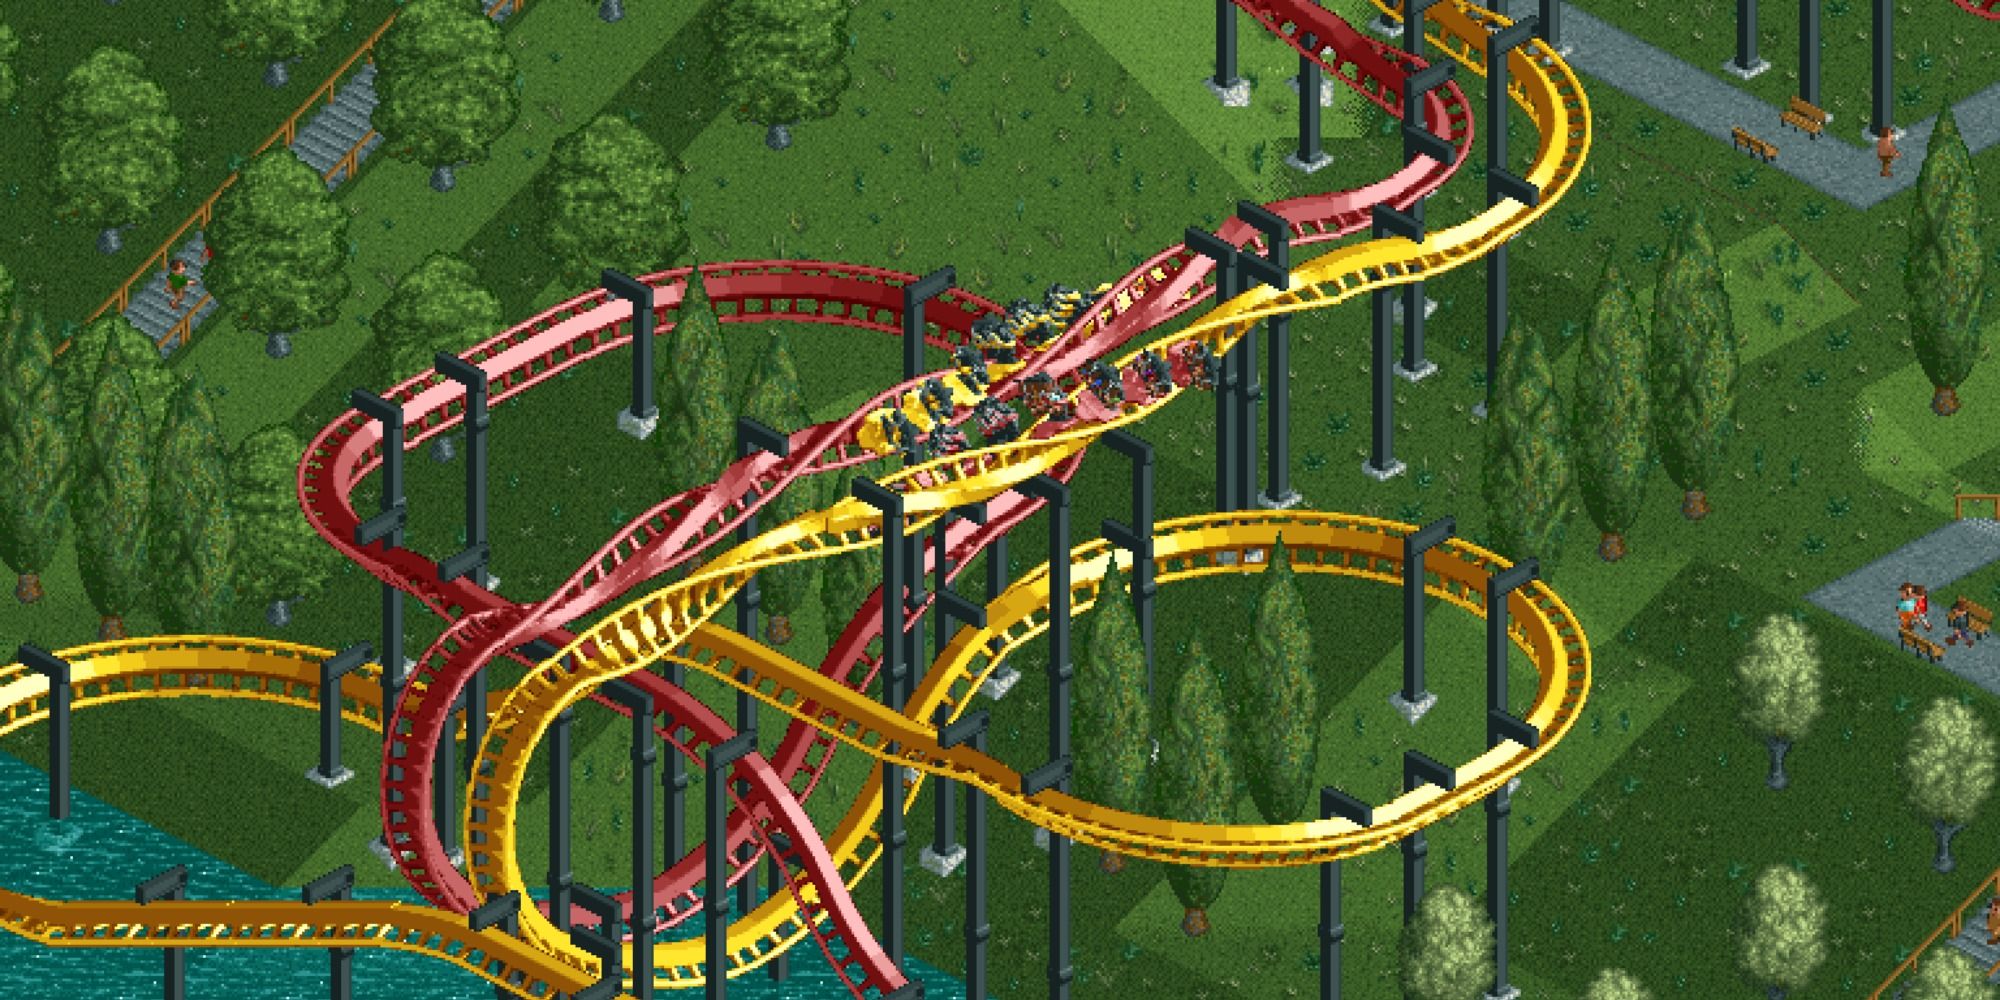 Roller Coaster Tycoon Inverted coaster over a grassy slope